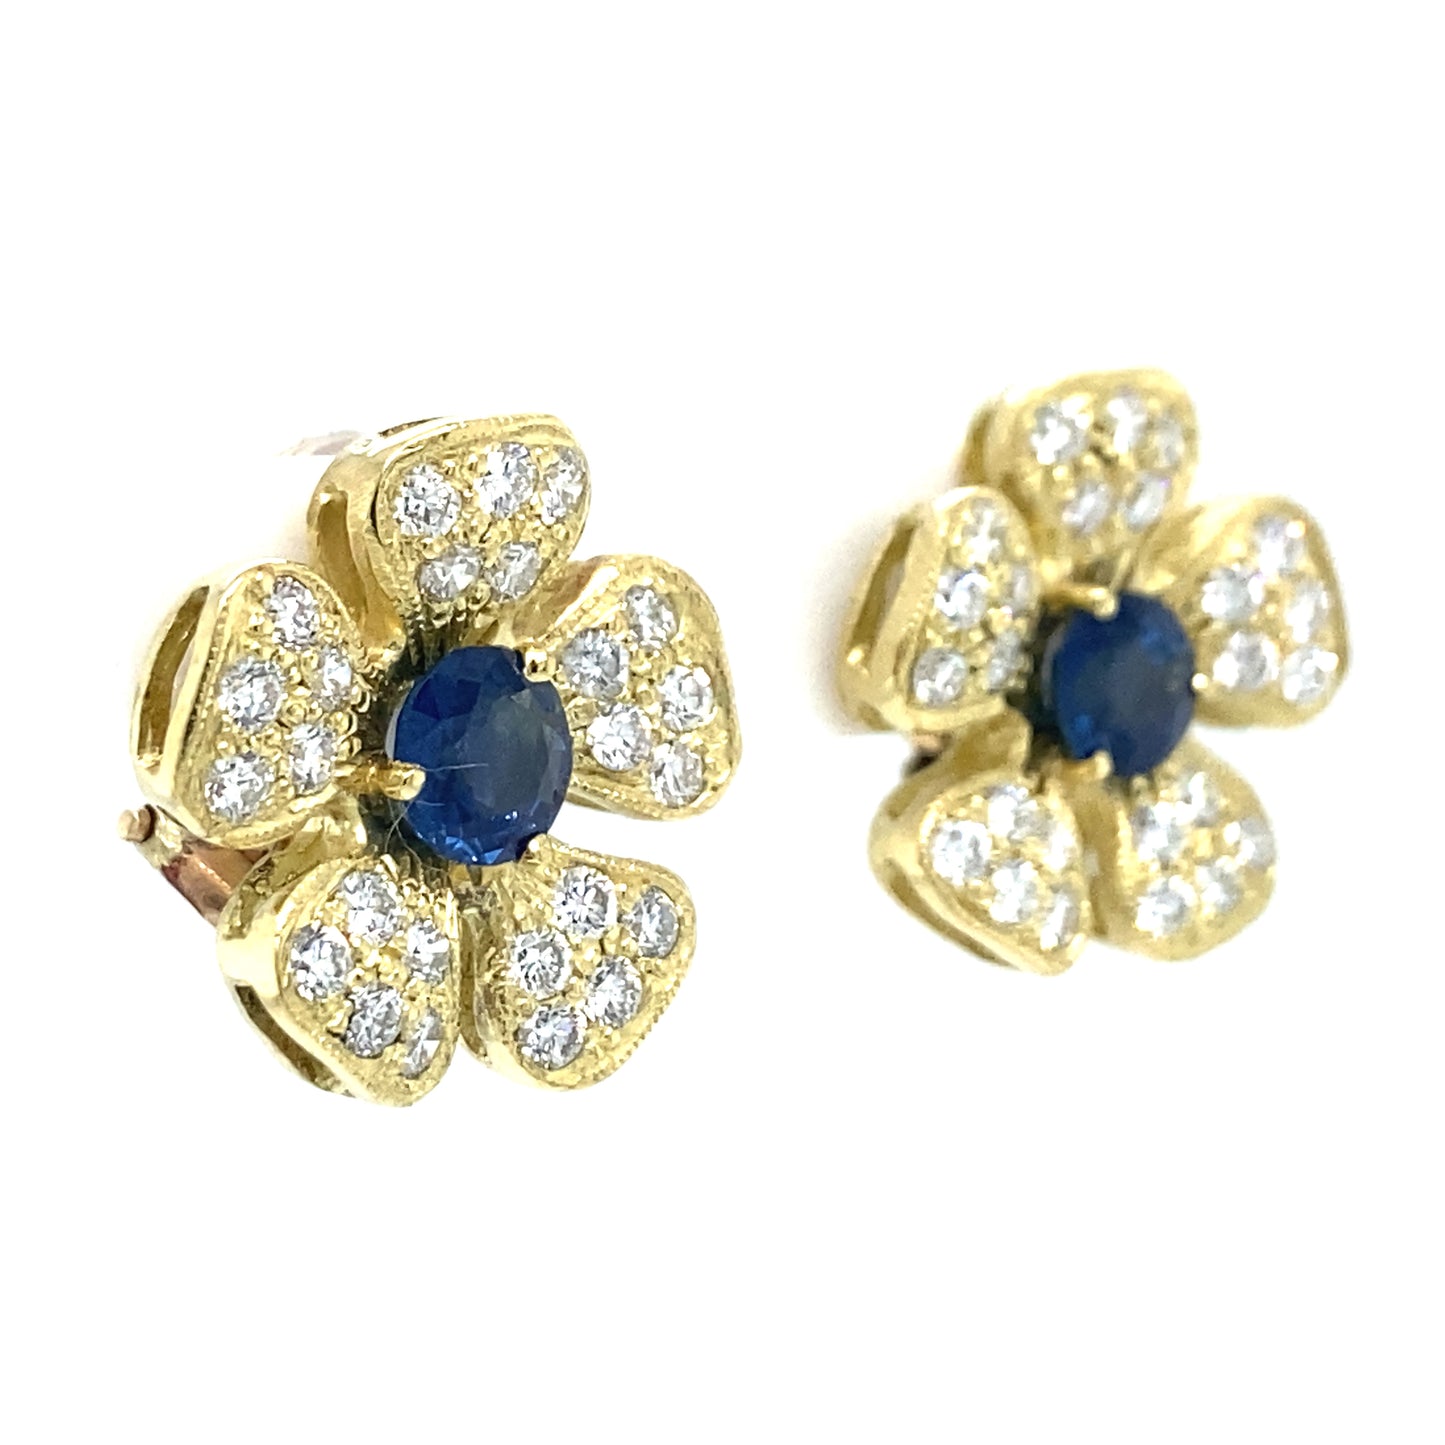 Floral Blue Sapphire Earrings in 18K Yellow Gold